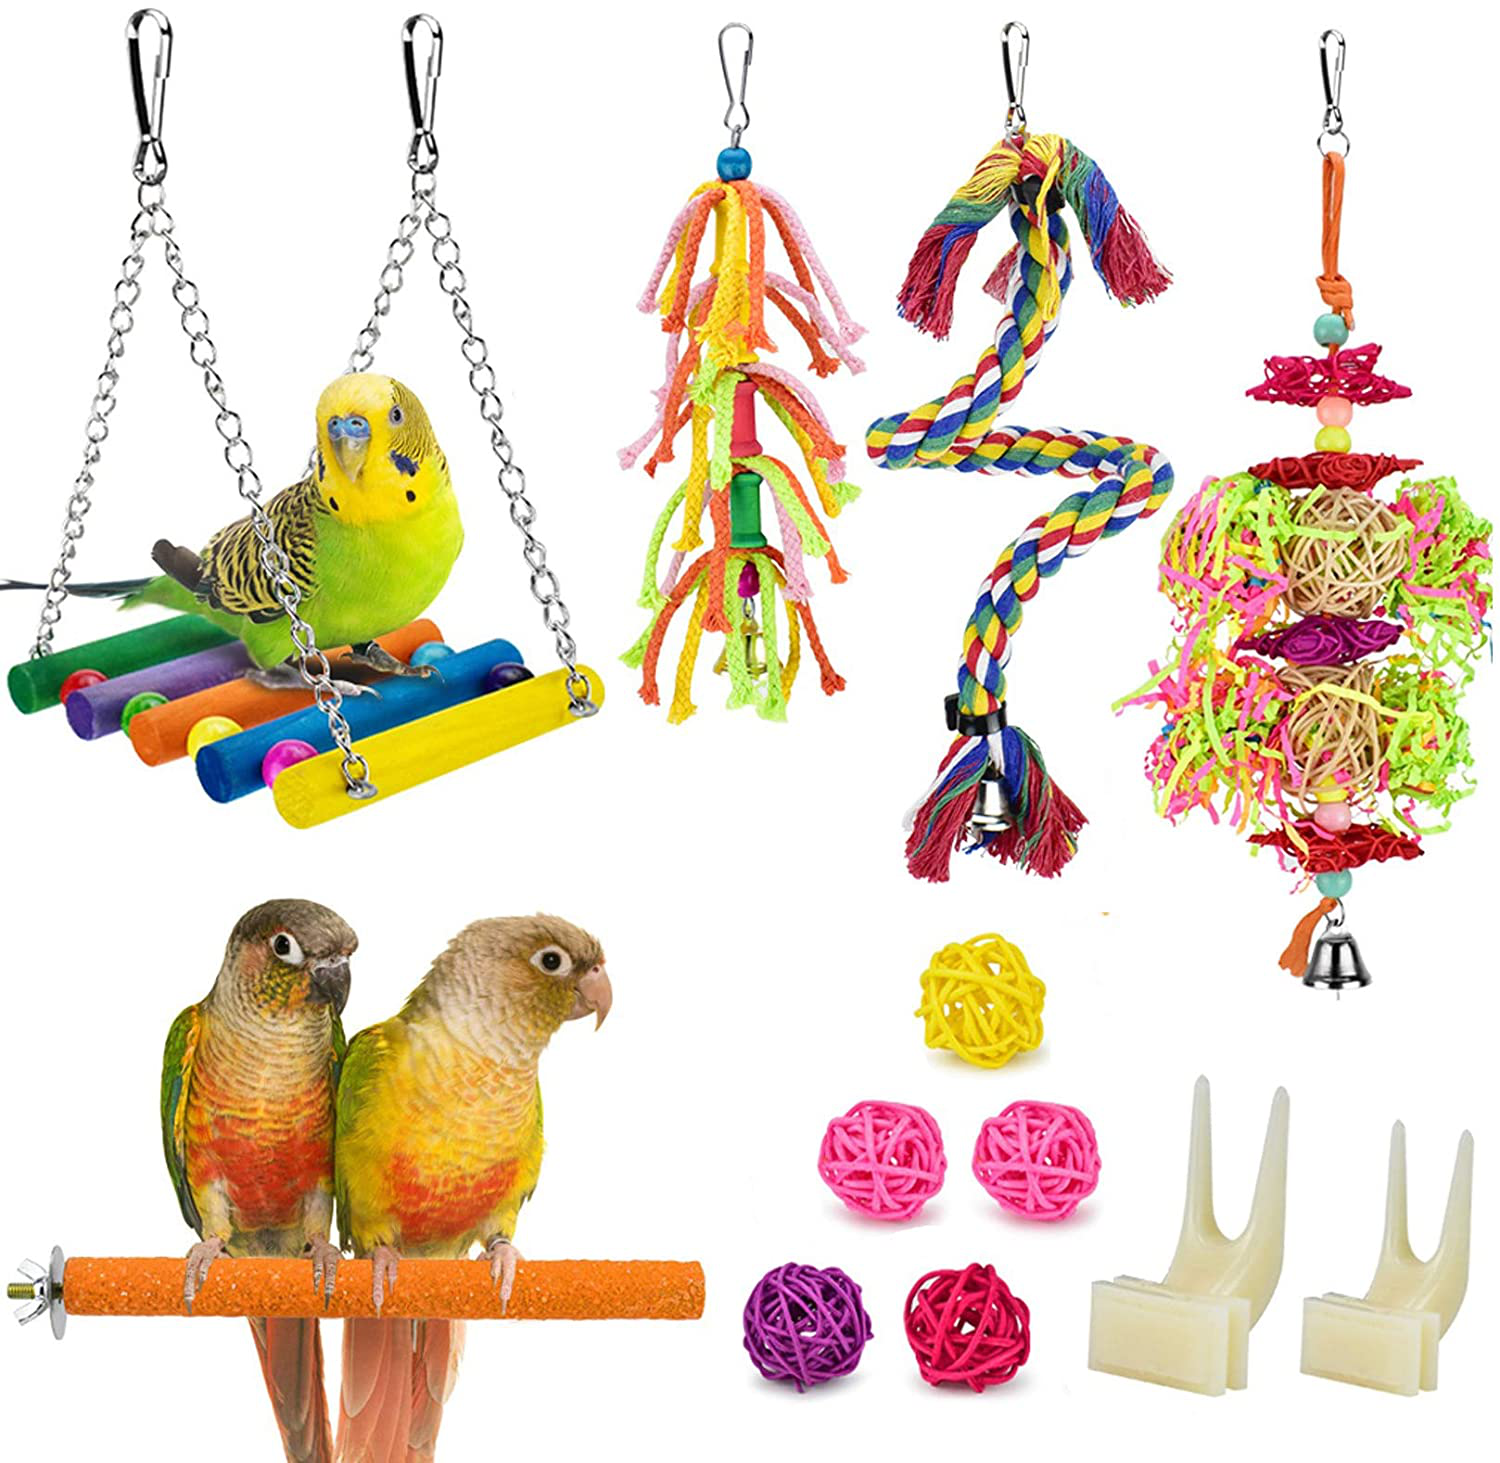 KATUMO Bird Swing Toys, 12 Packs Parrot Chewing Hanging Toys with Bells Rattan Balls Bird Perch Climbing Rope Fruit Forks for Parakeet, Conures, Cockatiel, Mynah, Lovebirds, Finch, Small Pet Birds Animals & Pet Supplies > Pet Supplies > Bird Supplies > Bird Toys KATUMO   